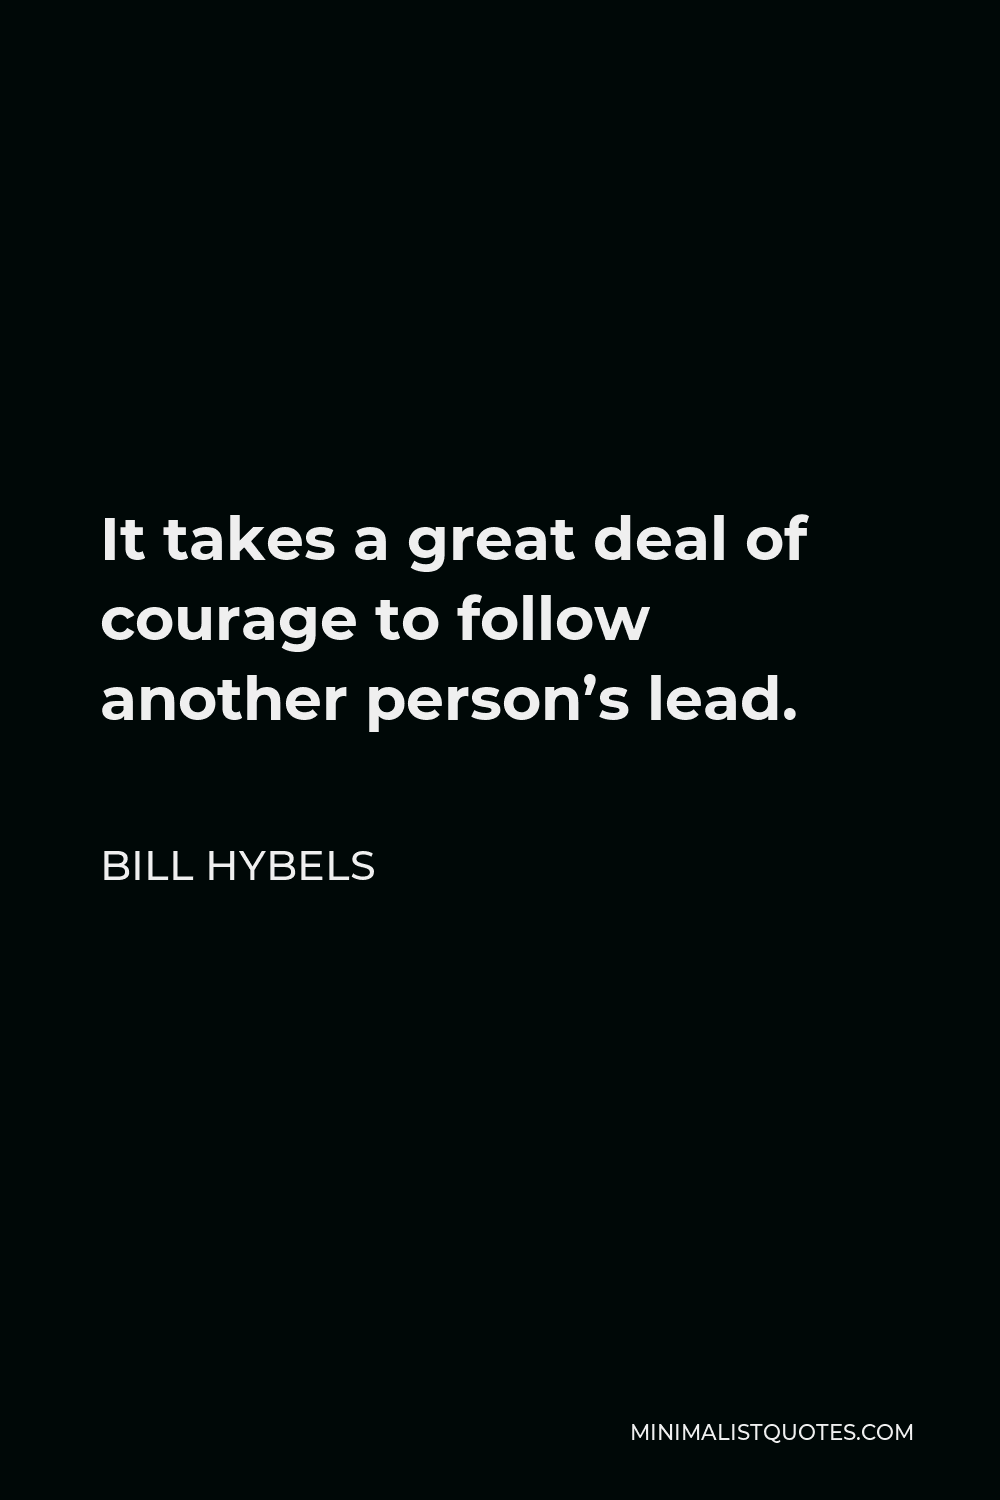 Bill Hybels Quote - It takes a great deal of courage to follow another person’s lead.